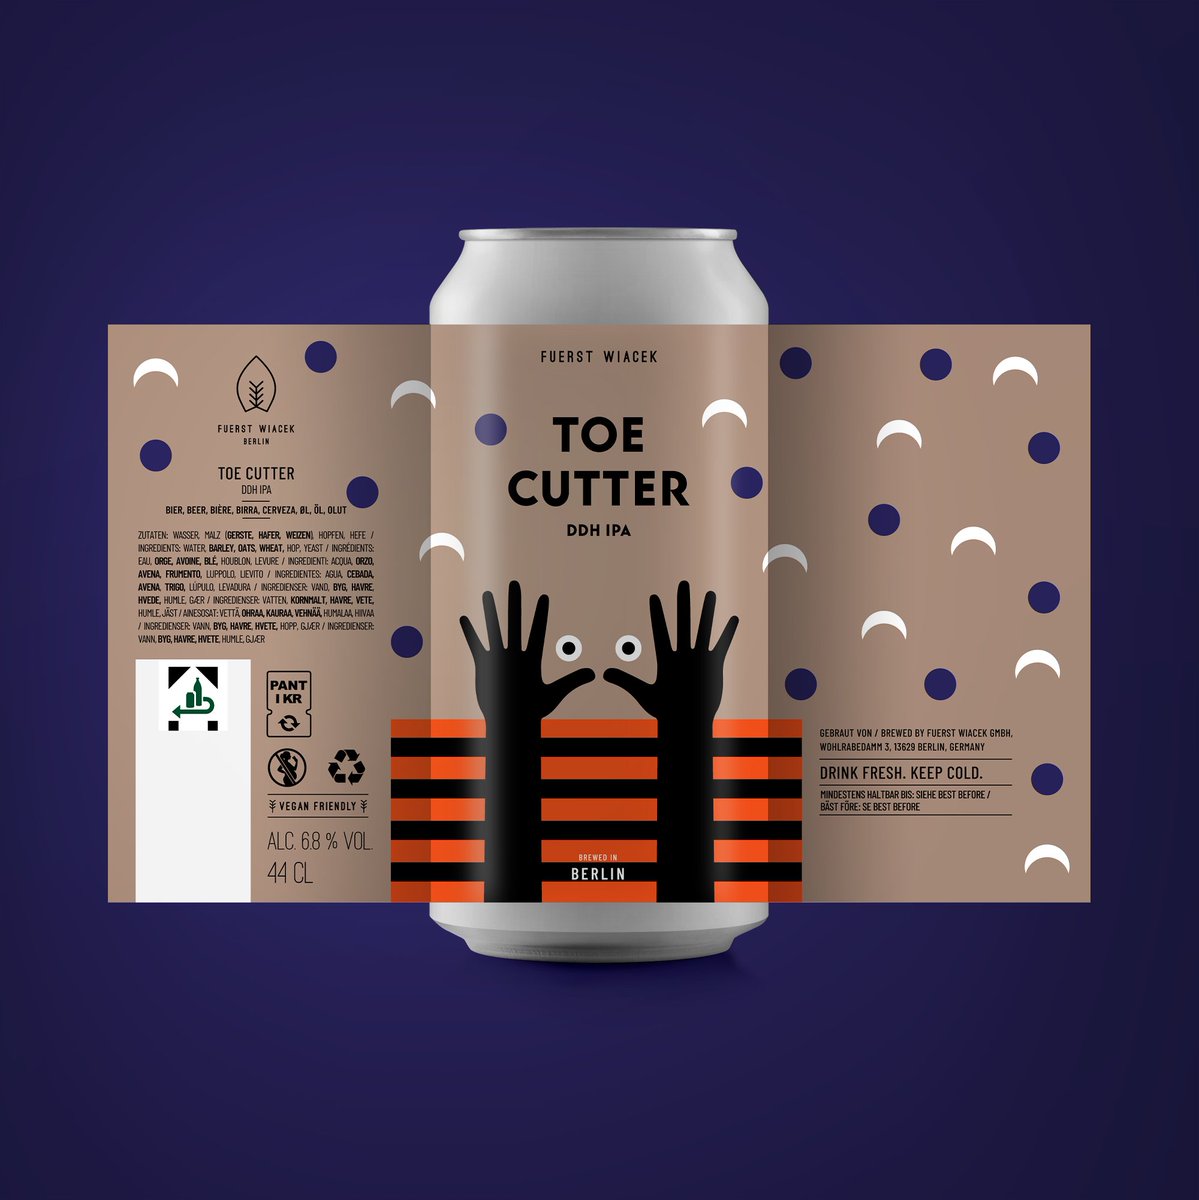 🚀 NEW RELEASE 🚀 Toe Cutter is available on the webshop. fuerstwiacek.com/buy/fresh-craf… Cans and kegs will start making their way out into the world in the coming days.